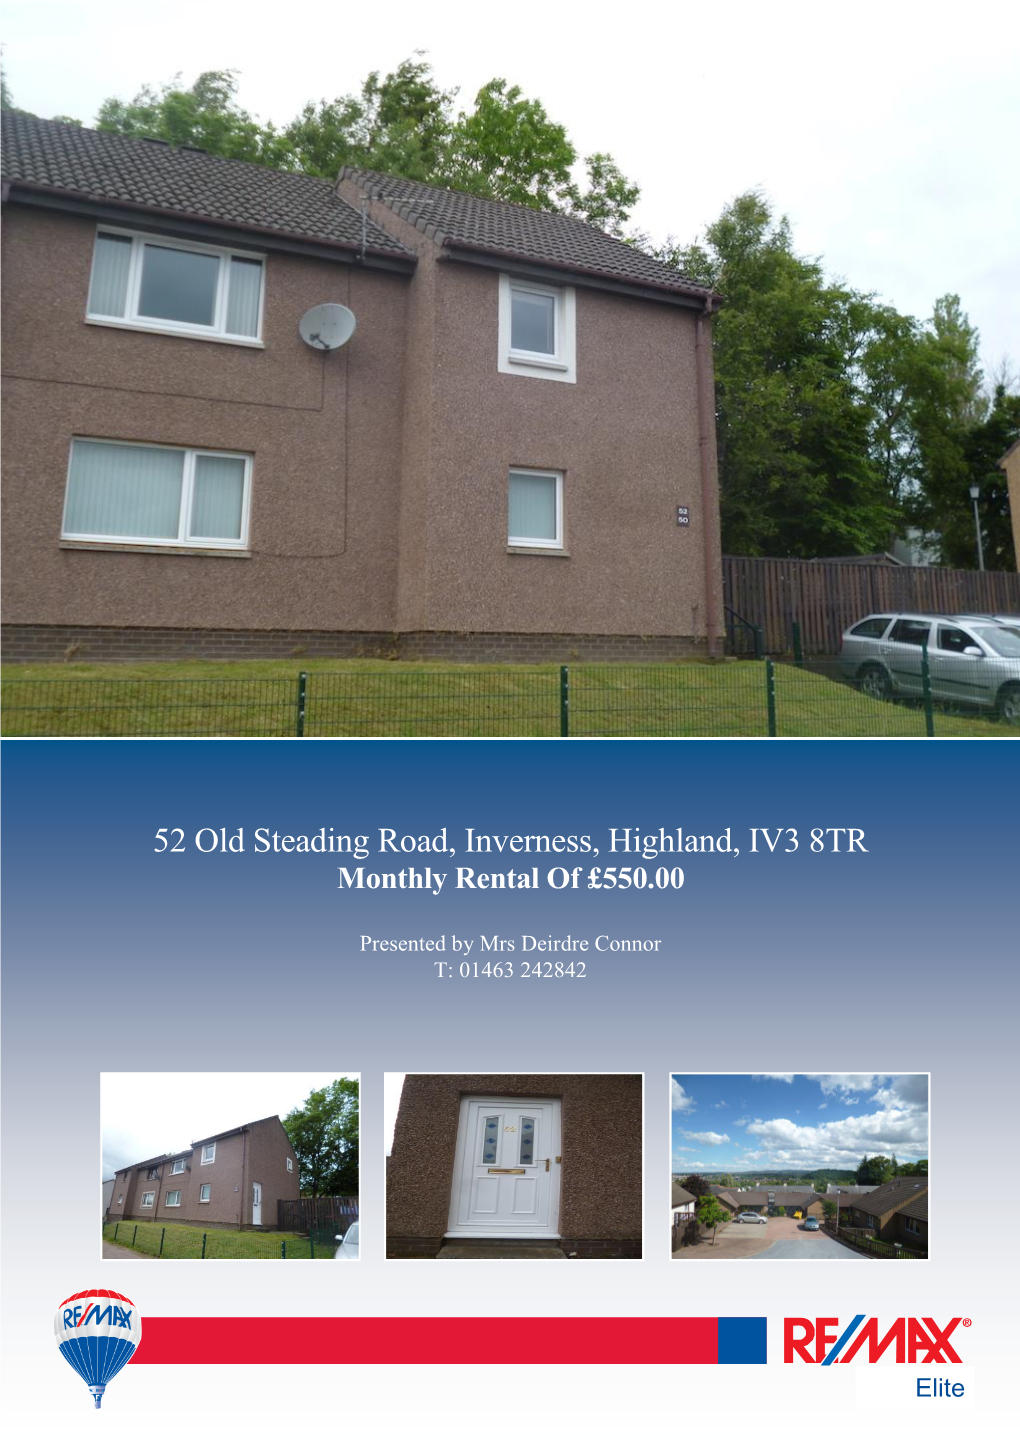 52 Old Steading Road, Inverness, Highland, IV3 8TR Monthly Rental of £550.00